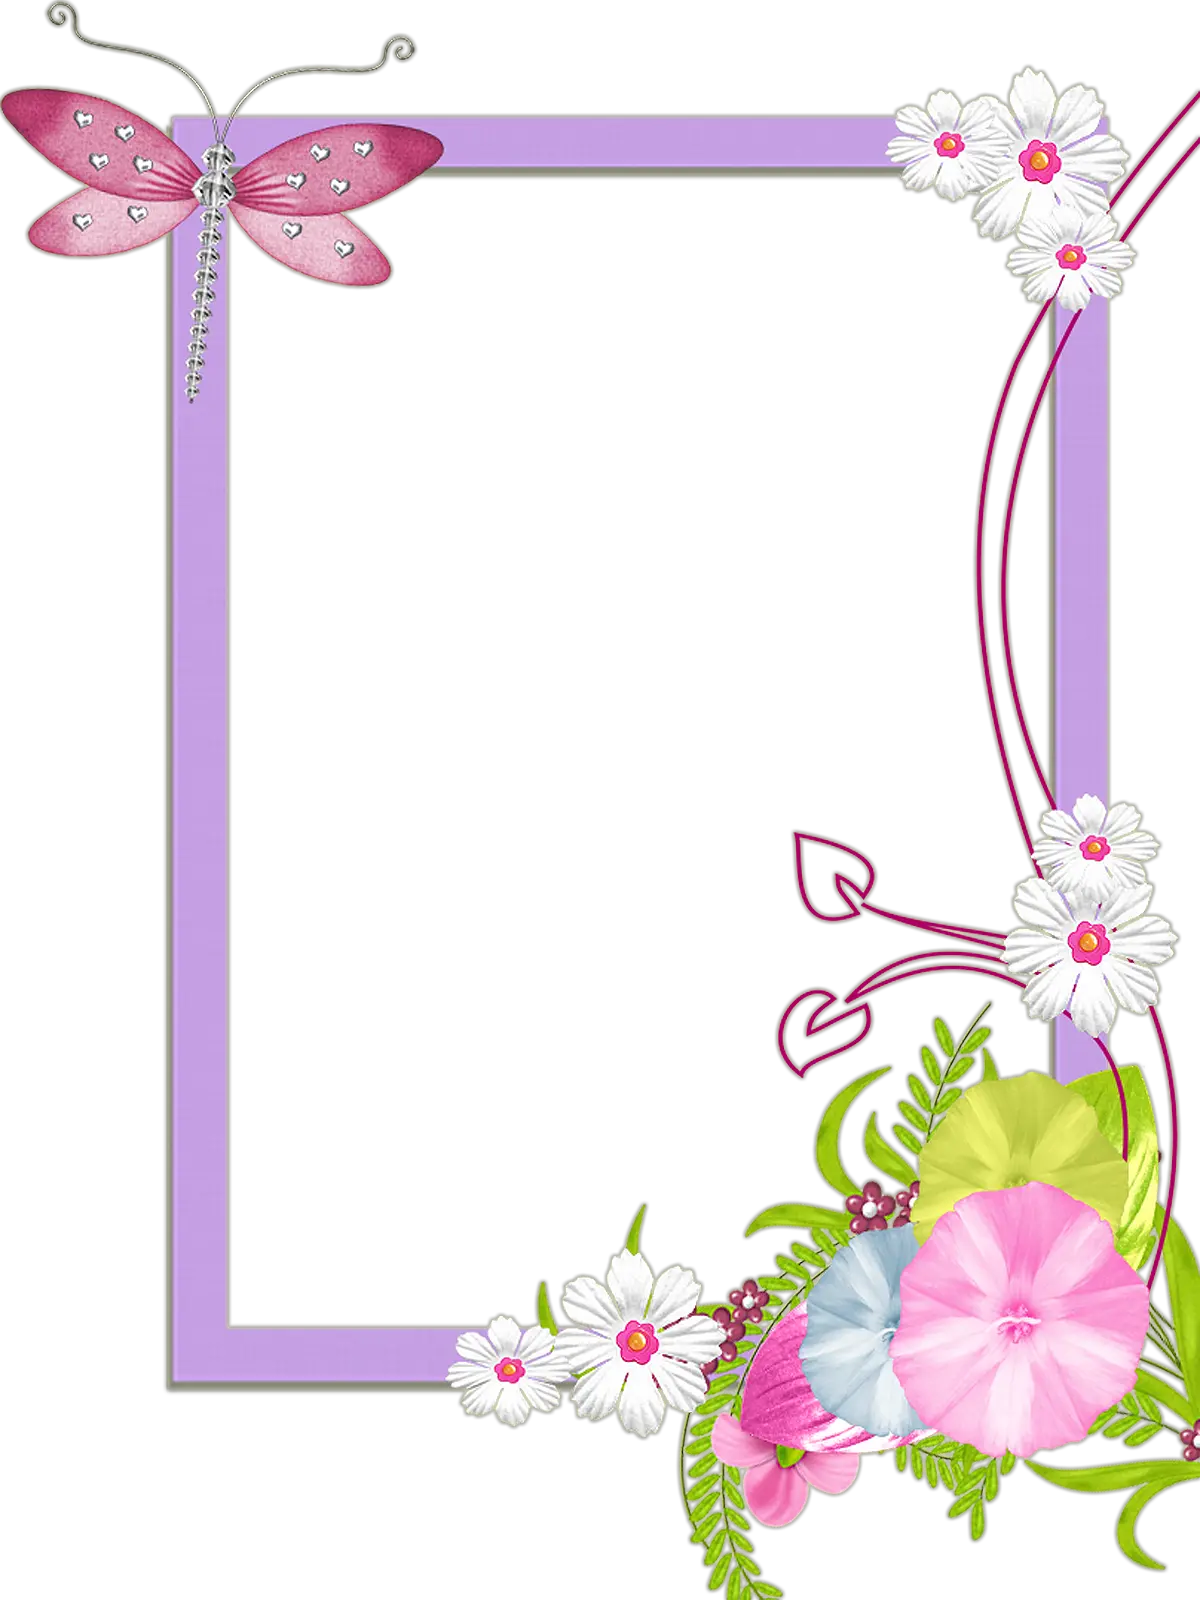 Frame Design Png Pin By Cantik Manis On And Frame Cute Png Cute Flower Frame Frame Design Png